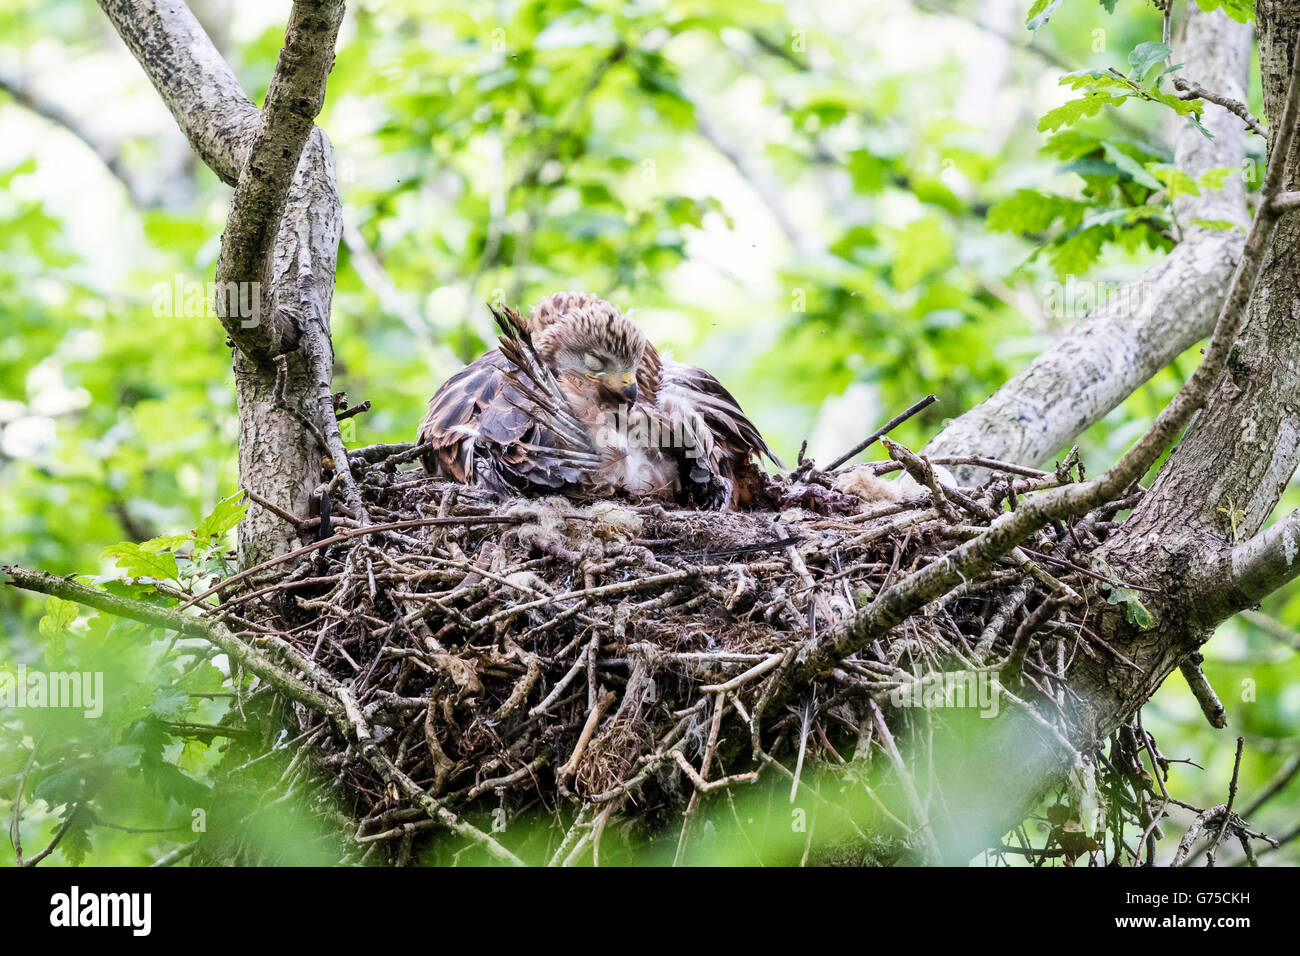 A red kite (Milvus milvus) chick in the verge of fledging (branching out) in a springtime Welsh woodland. Stock Photo